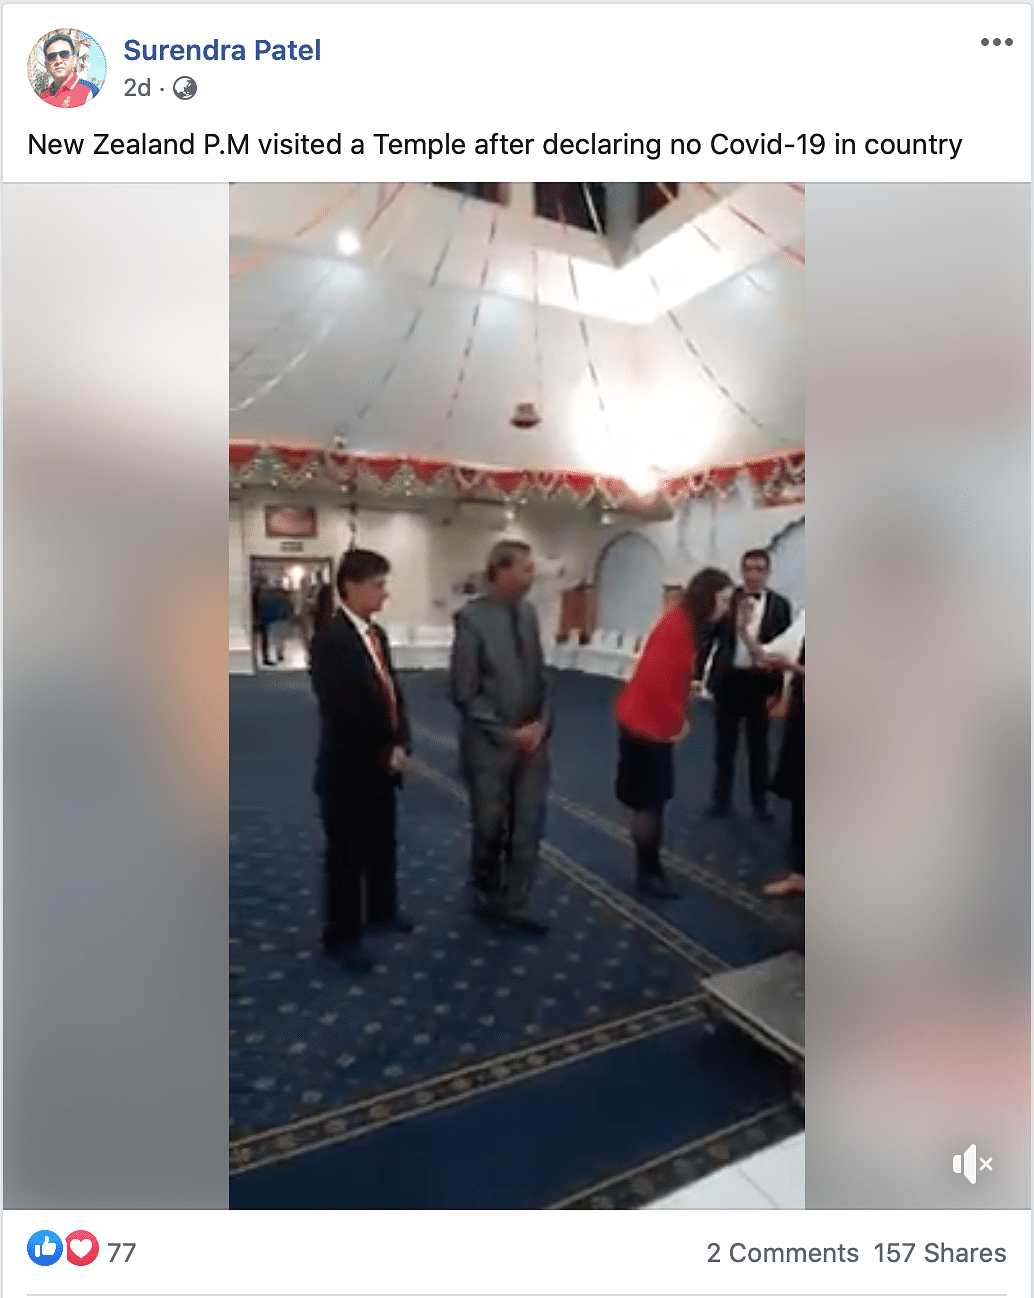 The video was shared by the temple’s Facebook page but nowhere mentioned that the visit was related to COVID.